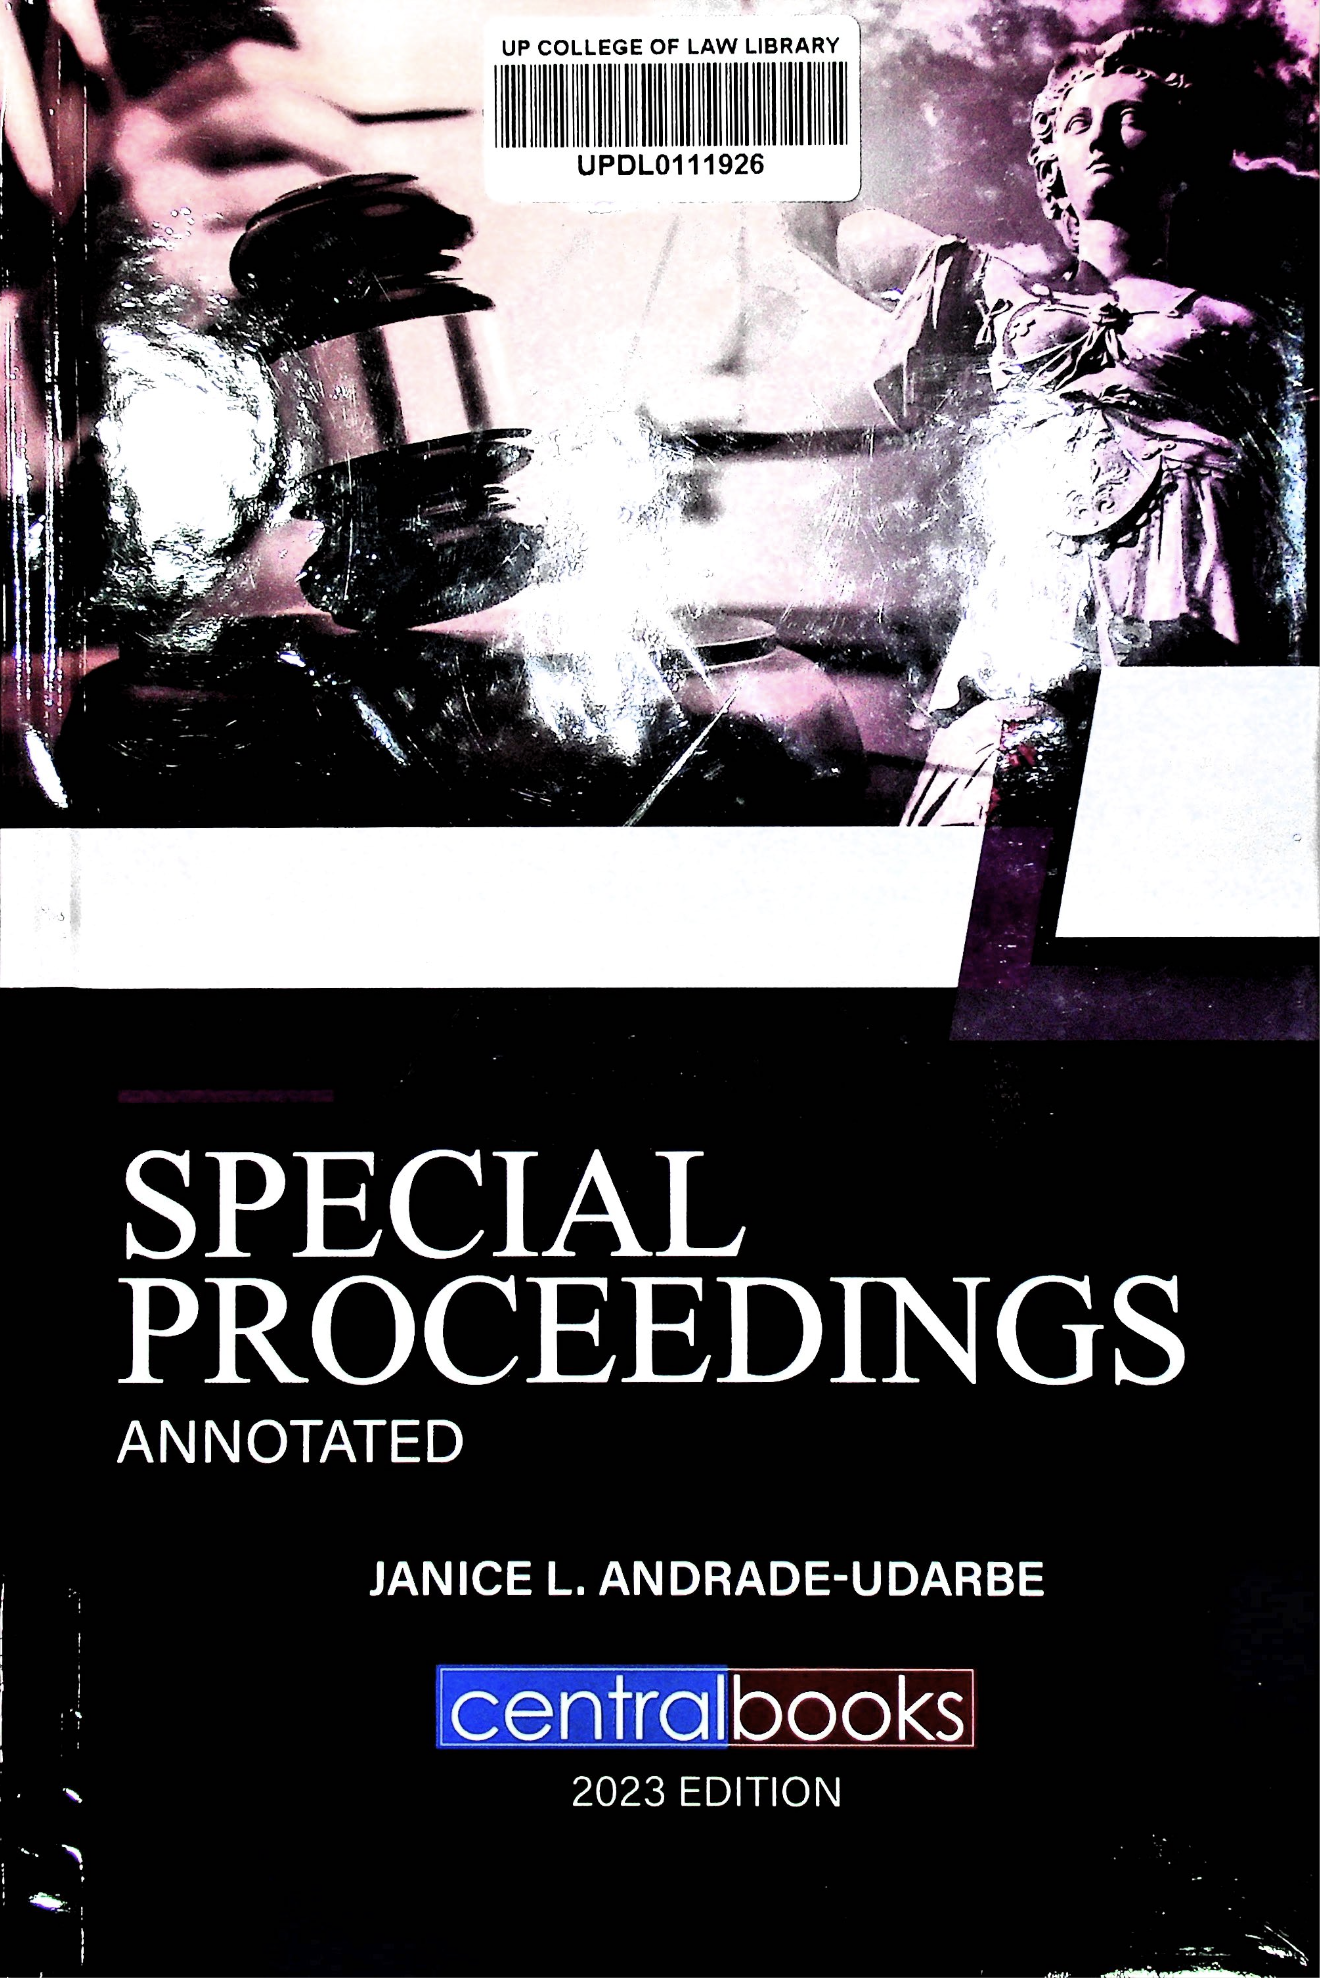 Special proceedings annotated